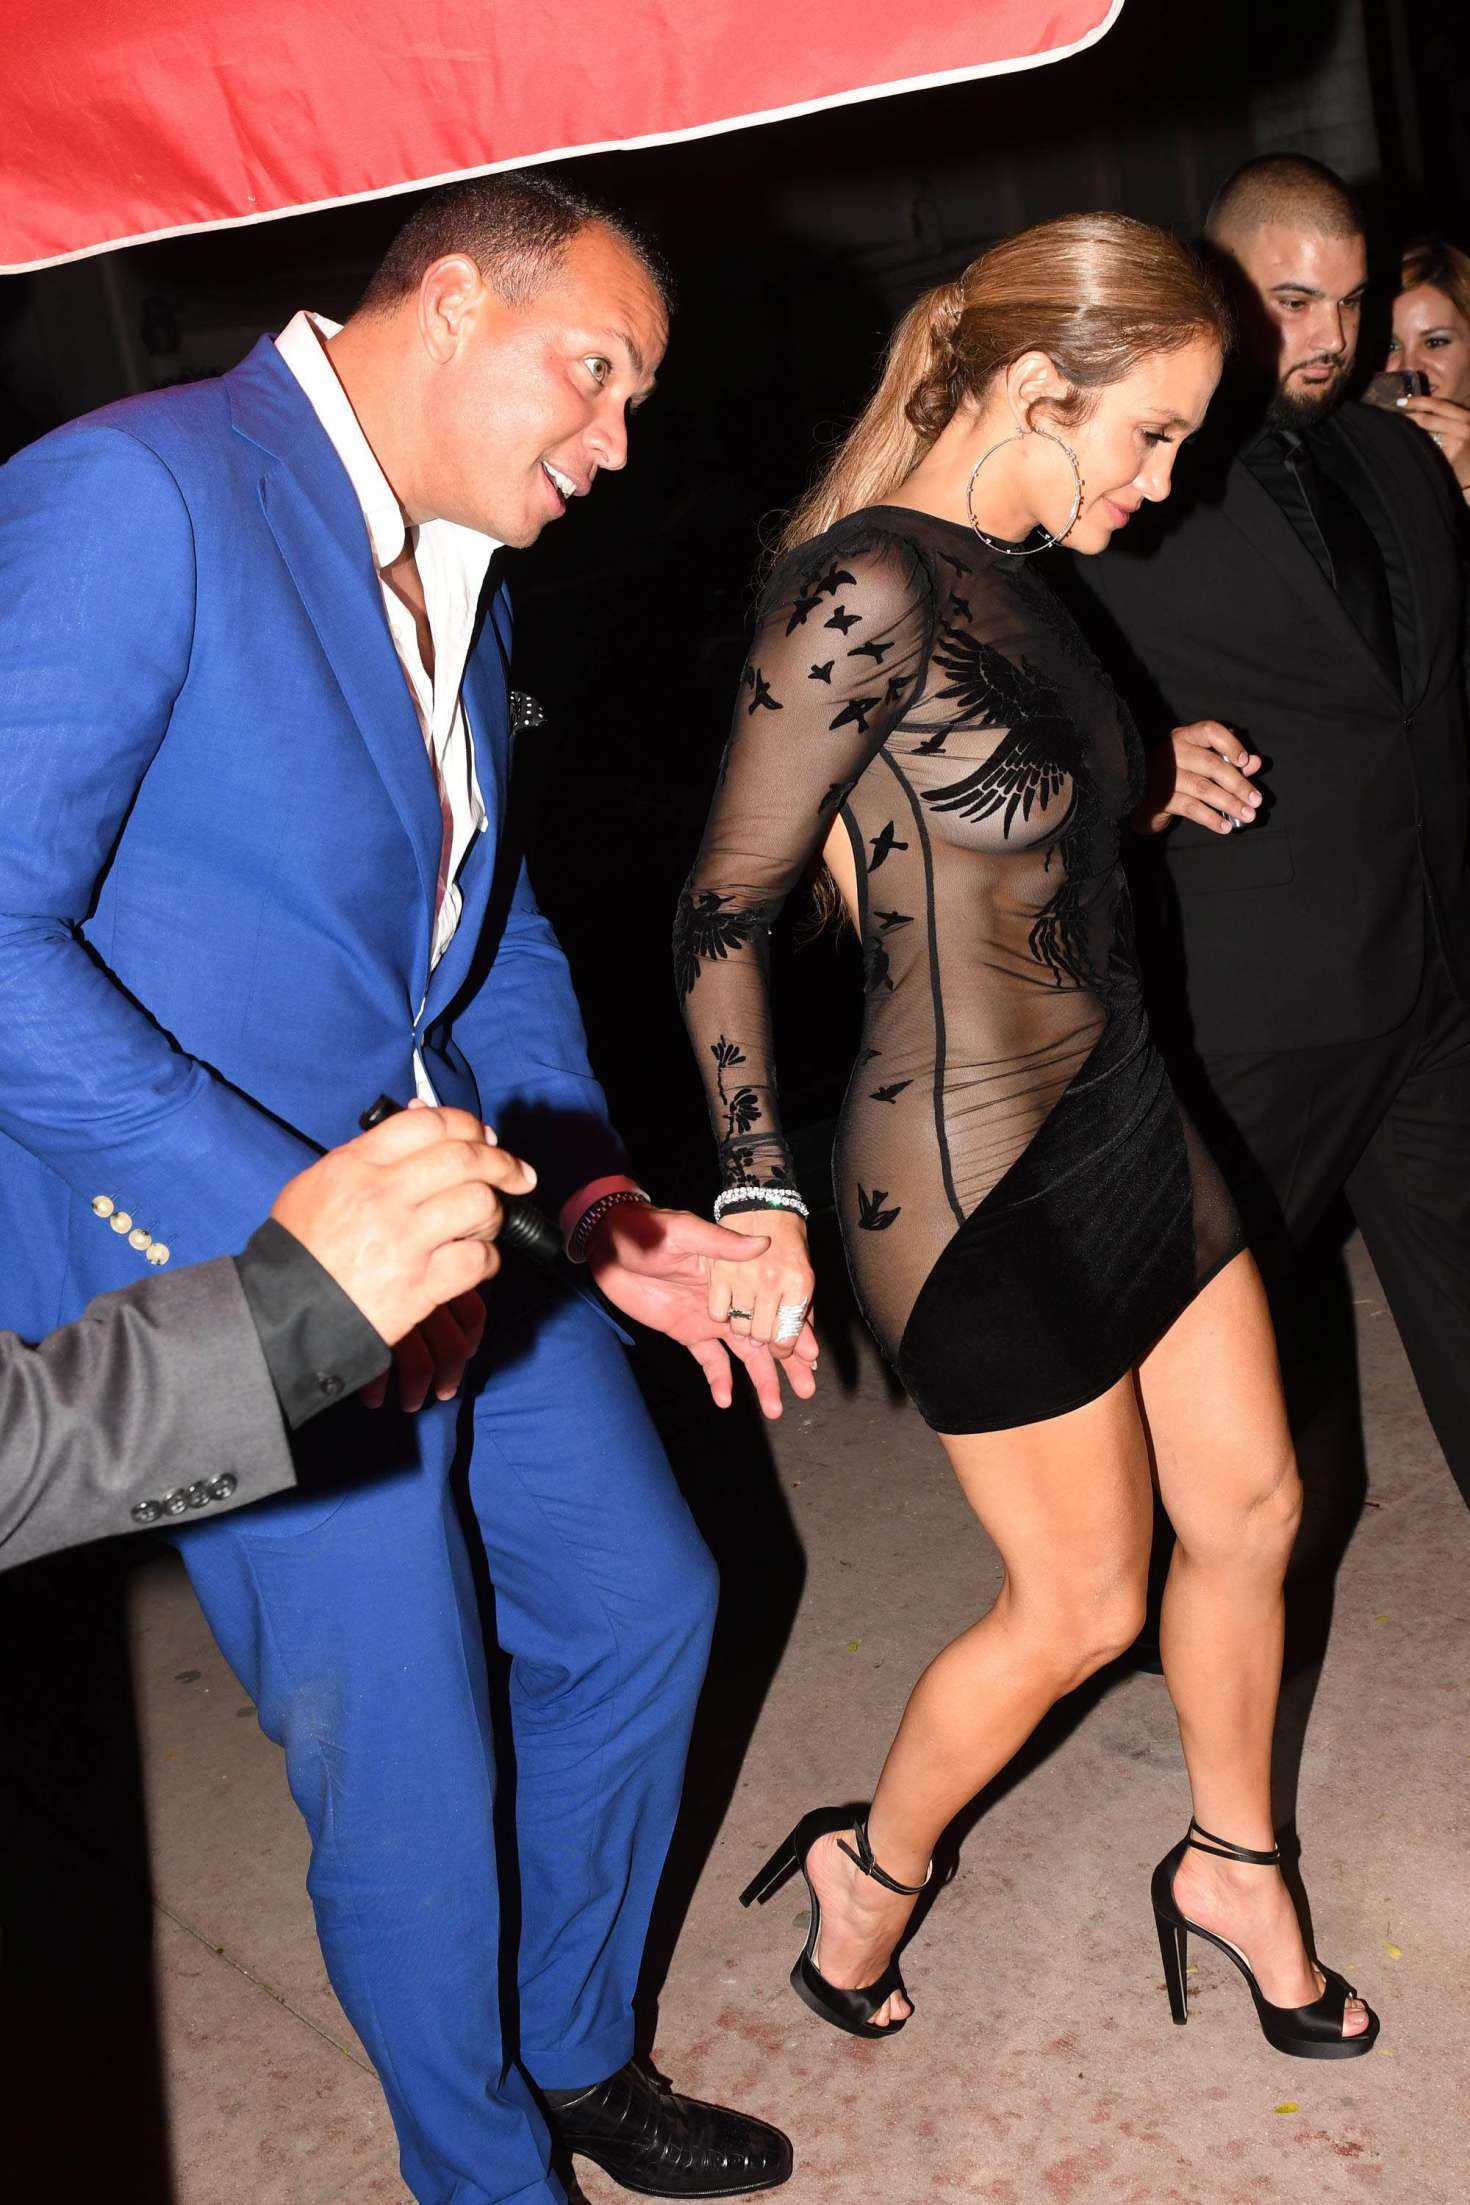 0ac1a Jennifer Lopez Leggy 620 1 - Jennifer Lopez Leggy in Short See-Through Dress at Her Birthday Party in Miami